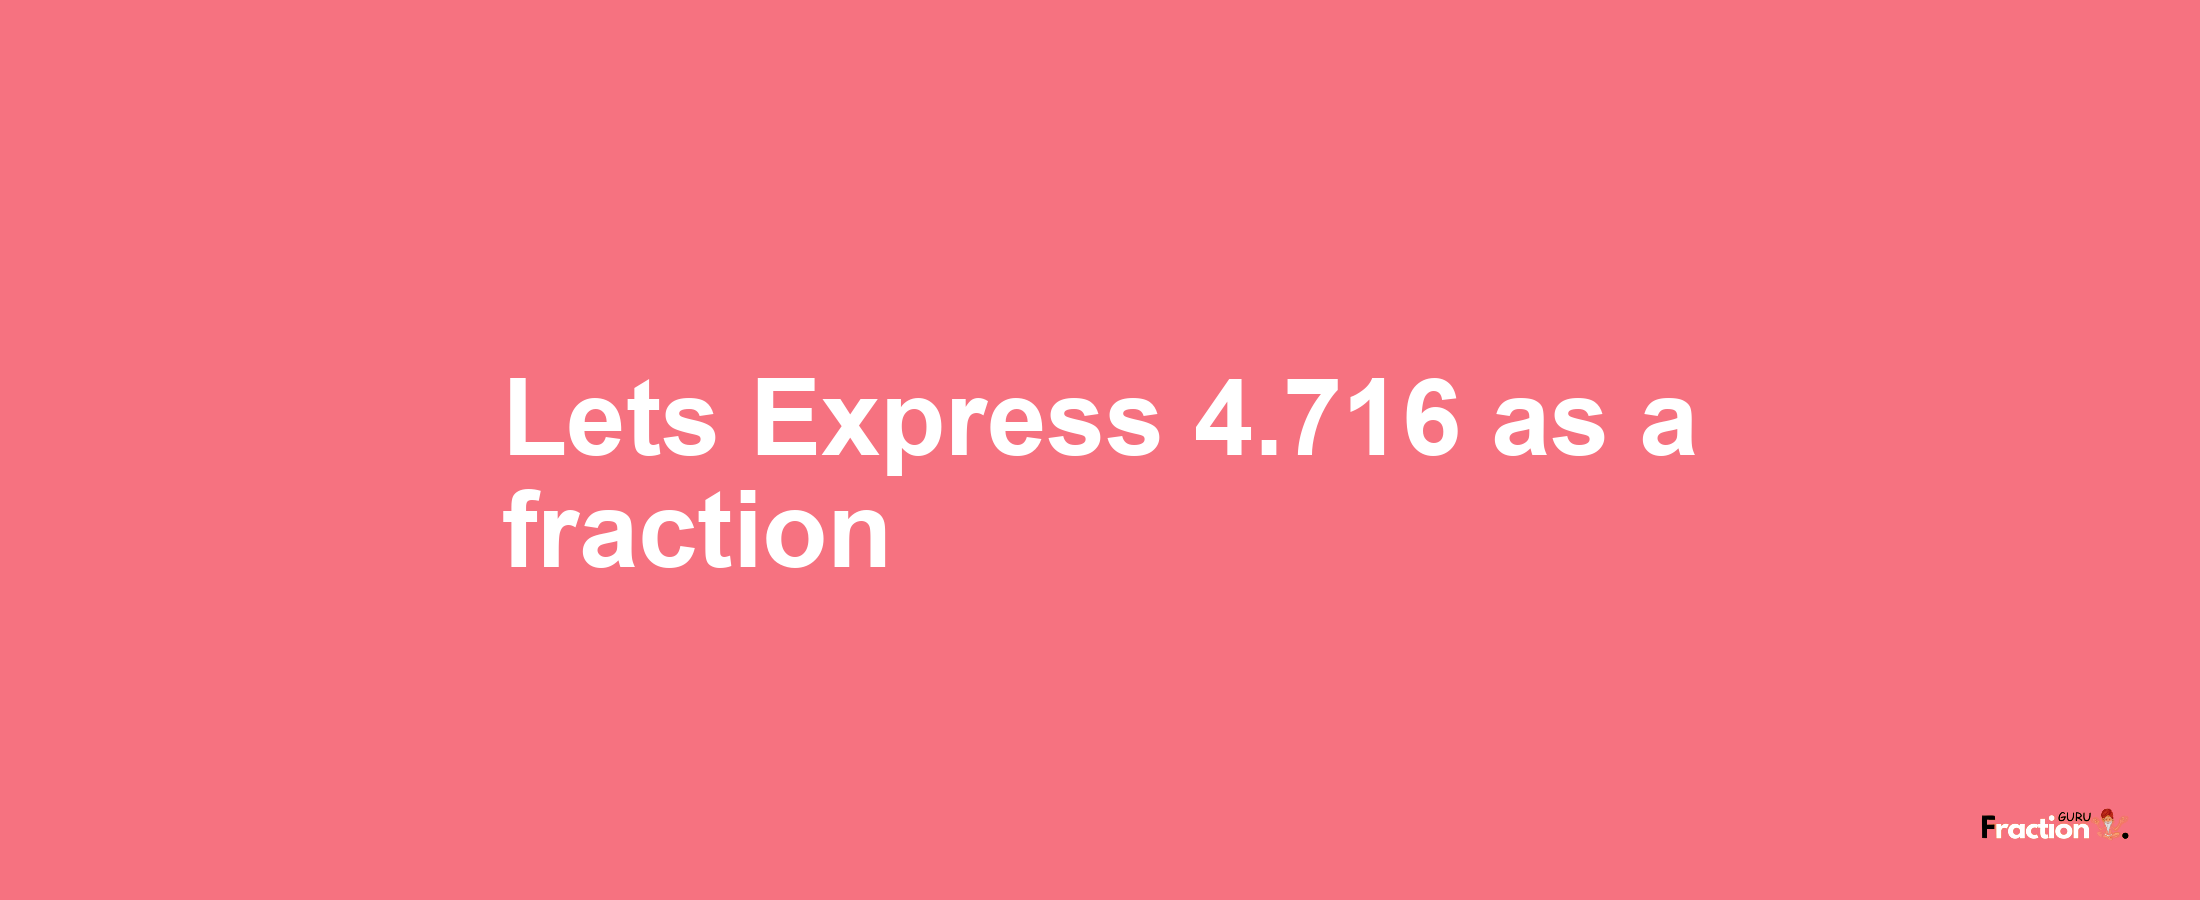 Lets Express 4.716 as afraction